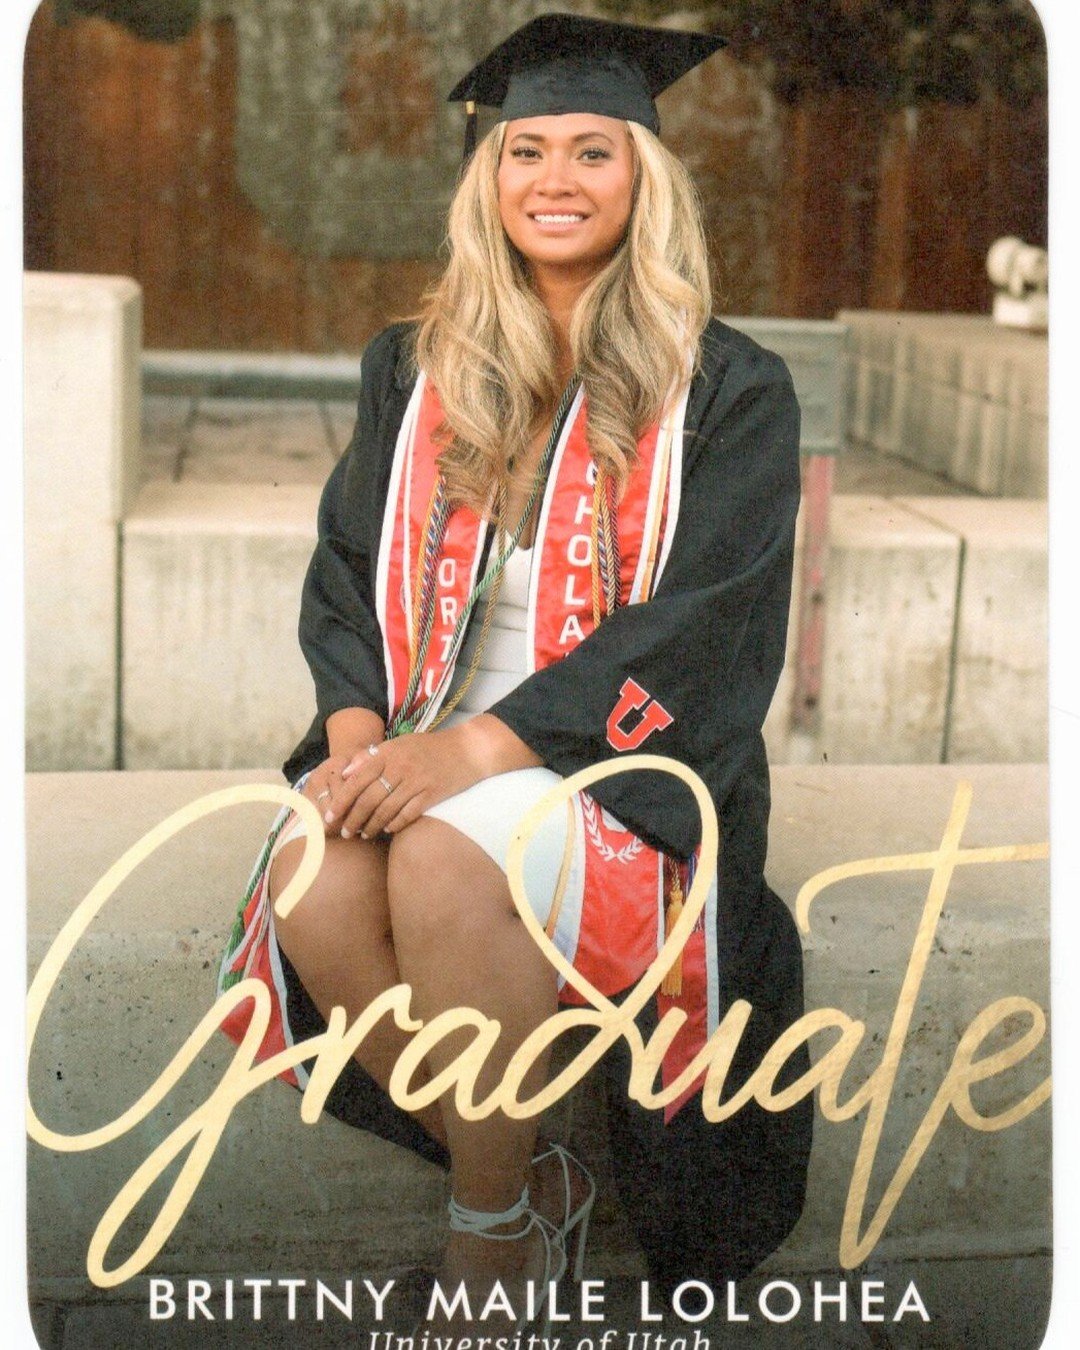 We are thrilled to see @brittnylolohea graduate from the University of Utah! What an example you are Brittny to your three beautiful daughters. Your courage, hard work, and determination have paid off. Congrats on this big day!